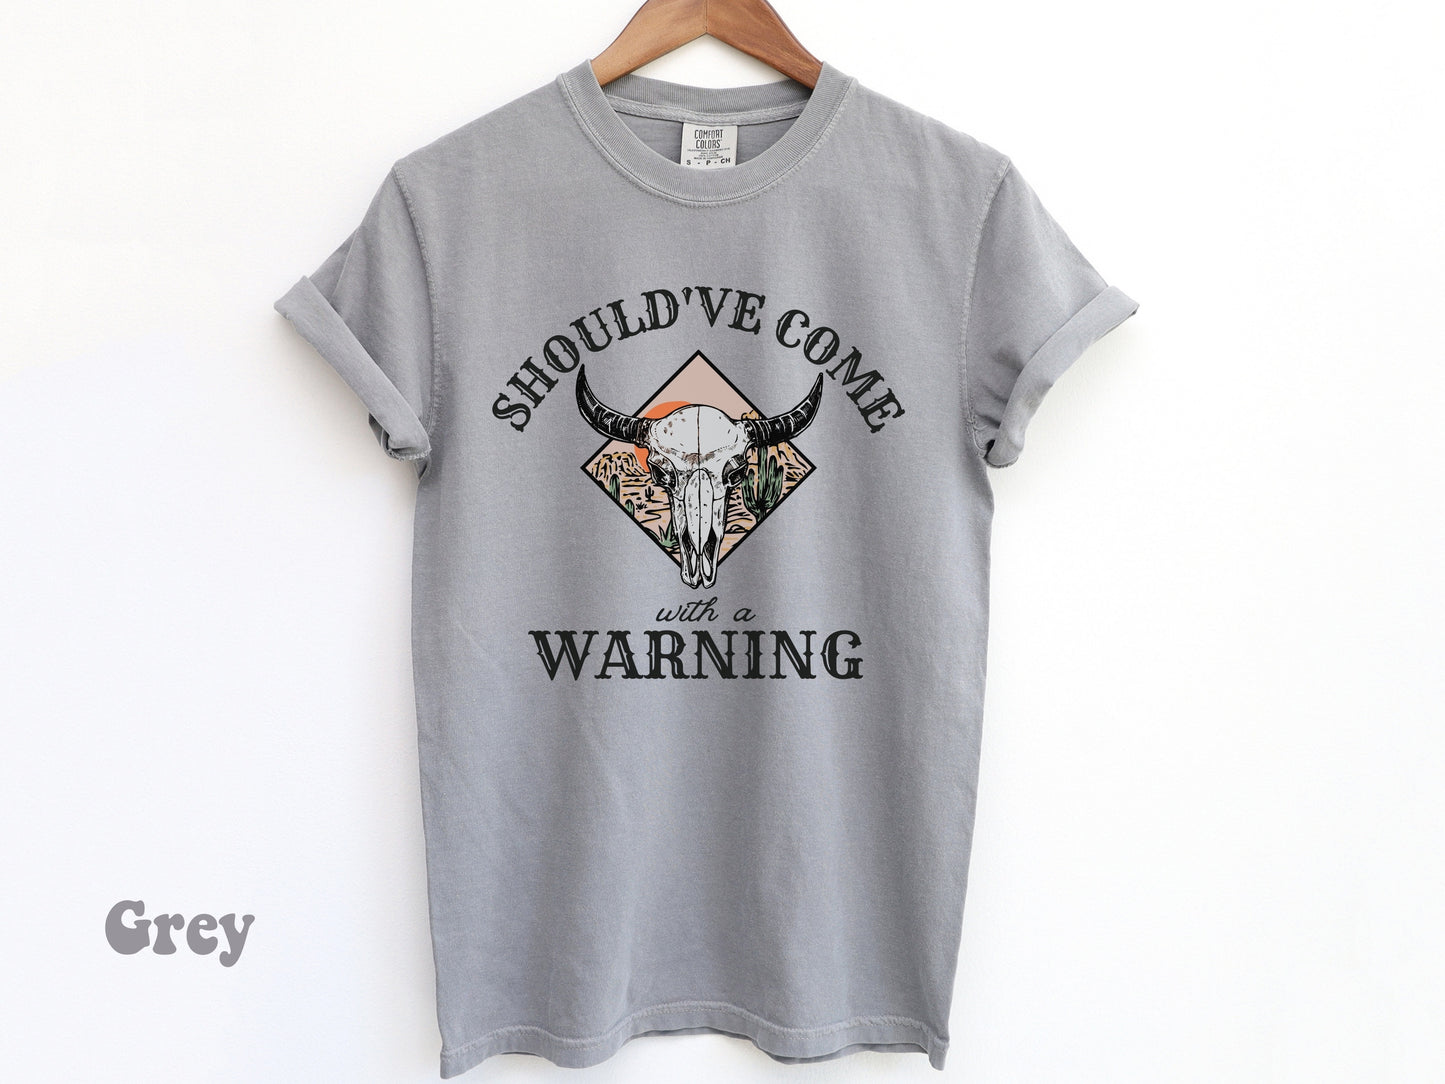 Country Music Shirt,Cute Western Shirt,Country Sweatshirt,Western Graphic Tee,Cute Rodeo Shirt,Wallen Music,Texas Country,Country Western,Country concert tee,Country Festival Tee,Beer Drinking,country song shirt,Come with a Warning